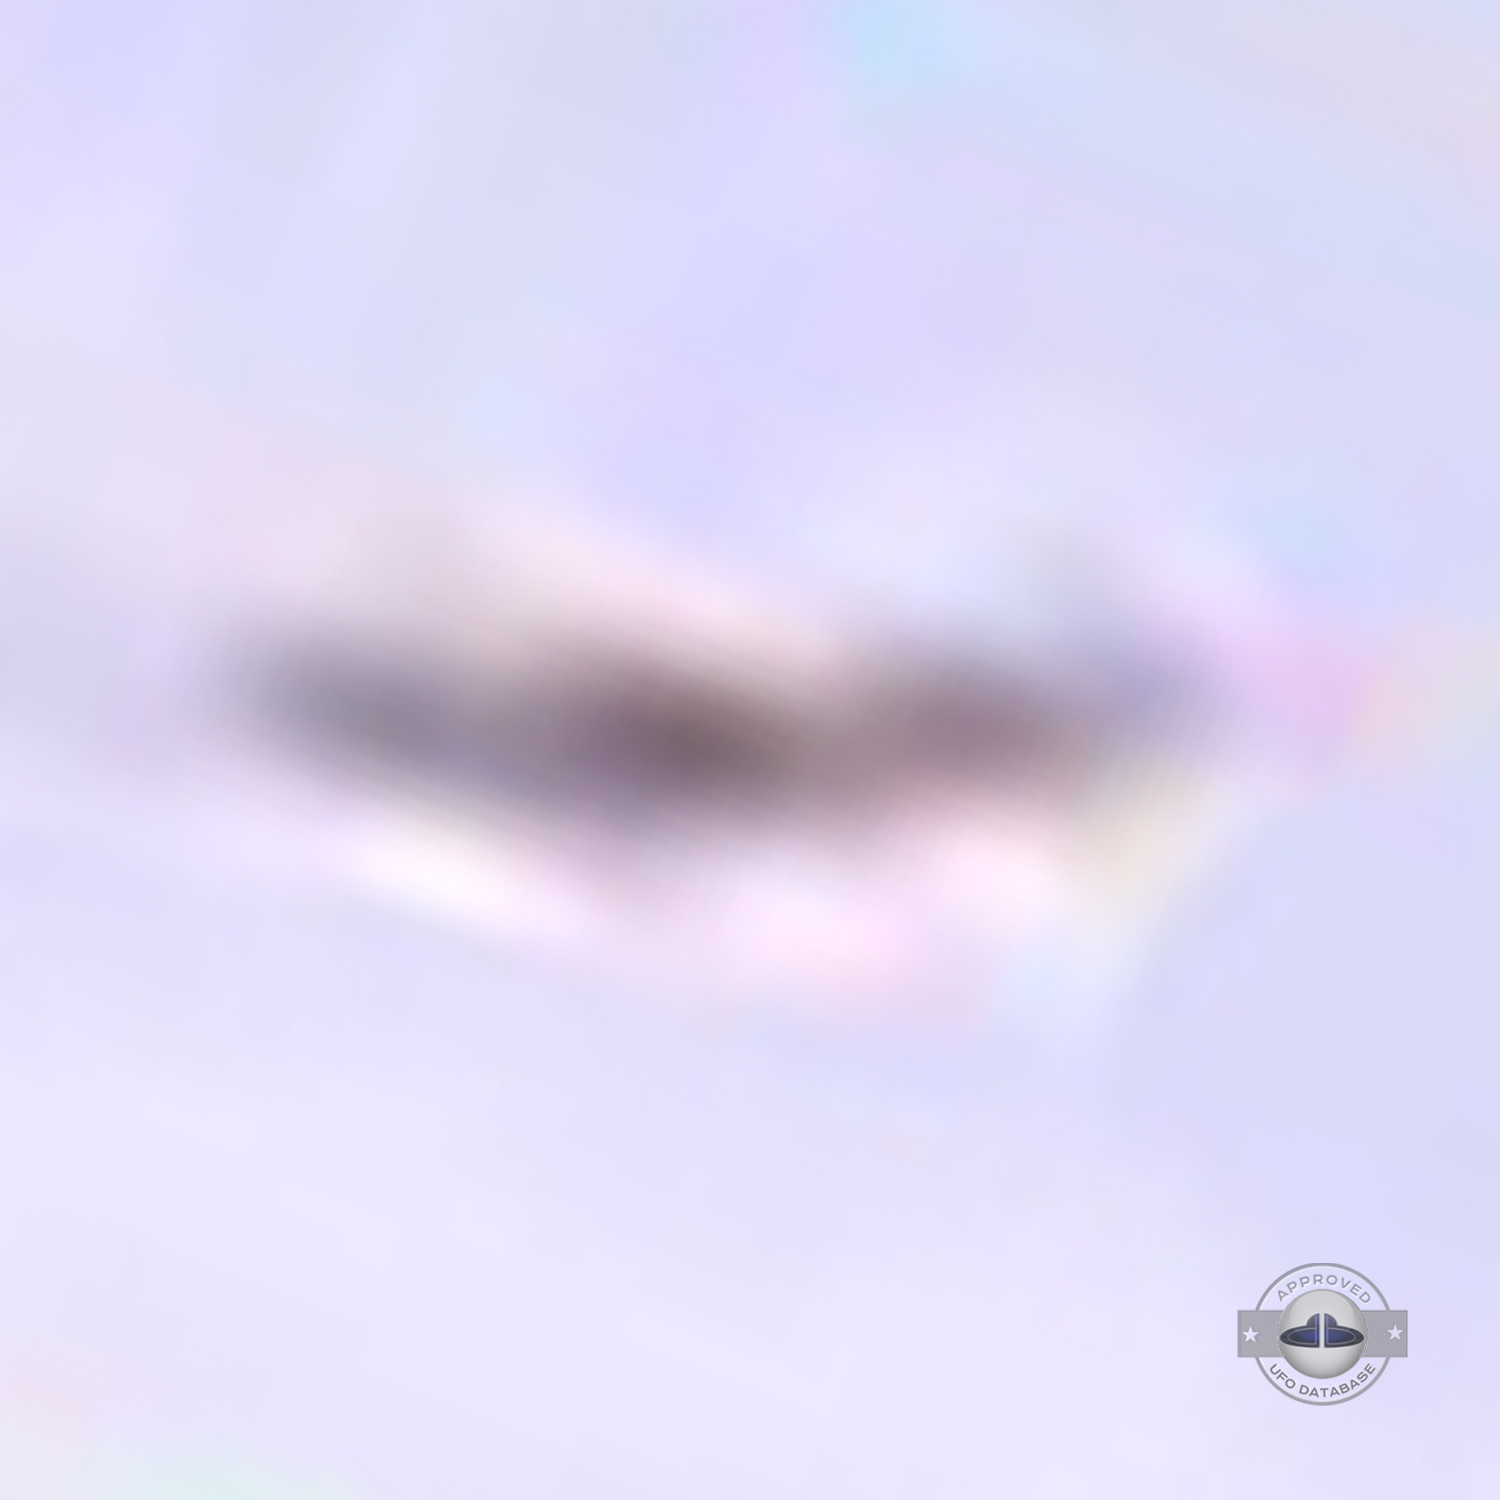 UFO seen passing over Kids in Baghdad, Iraq | April 03 2004 UFO Picture #199-6